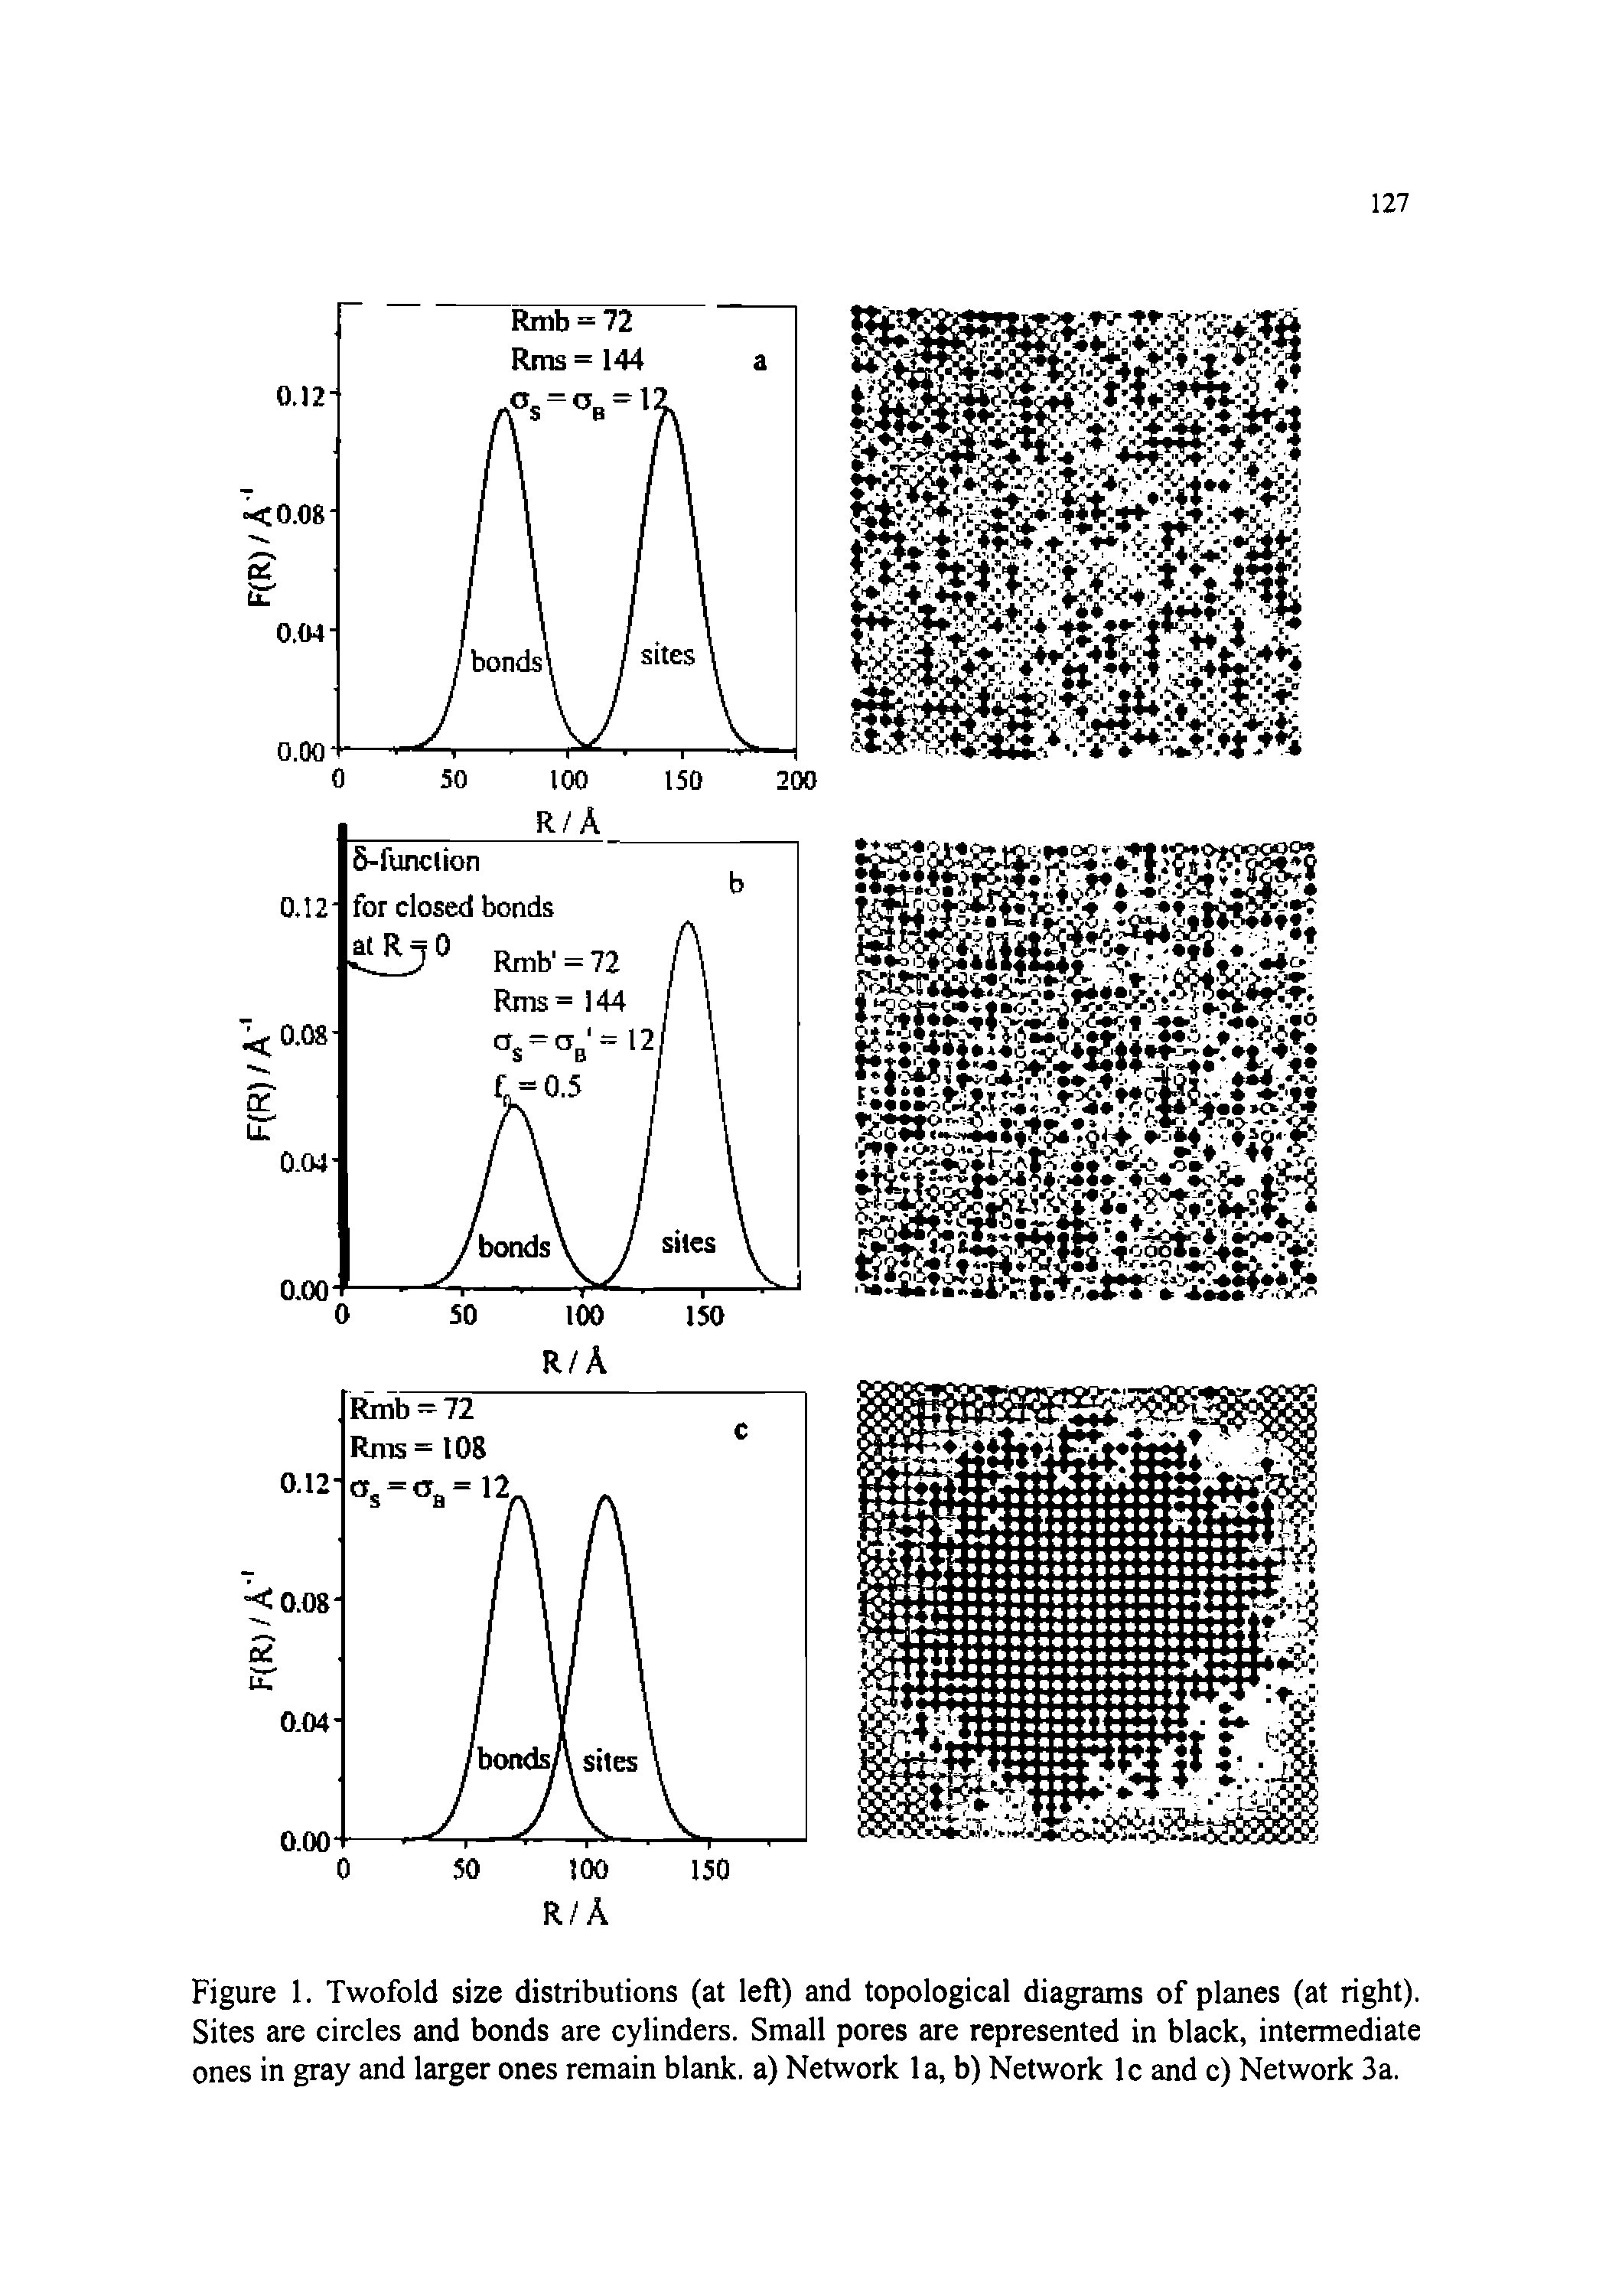 Figure 1. Twofold size distributions (at left) and topological diagrams of planes (at right). Sites are circles and bonds are cylinders. Small pores are represented in black, intermediate ones in gray and larger ones remain blank, a) Network la, b) Network Ic and c) Network 3a.